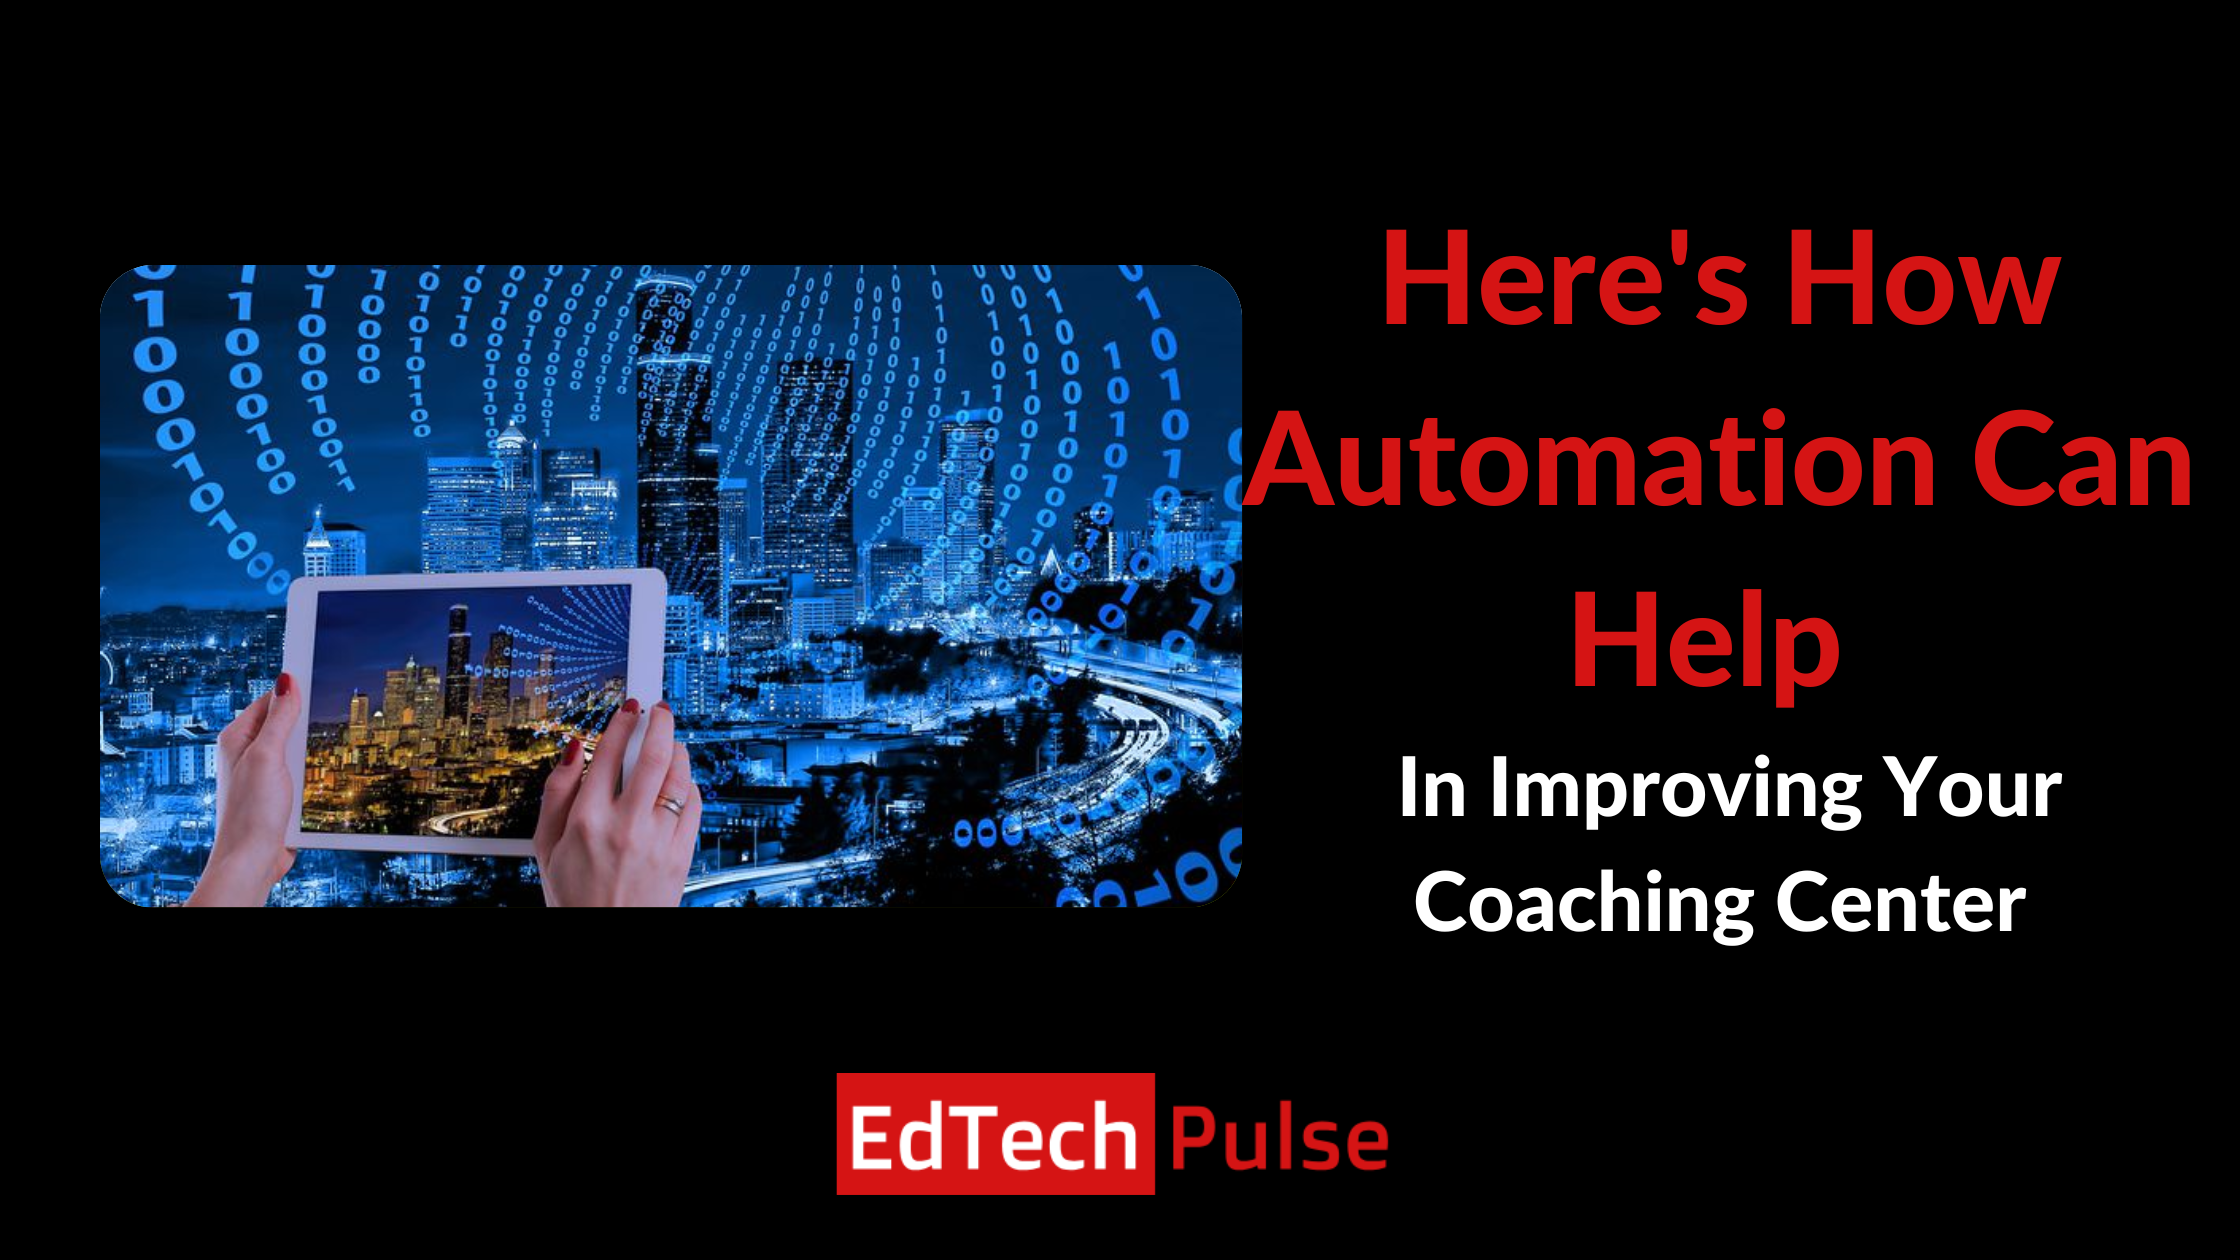 Here's How Automation Can Help In Improving Your Coaching Center